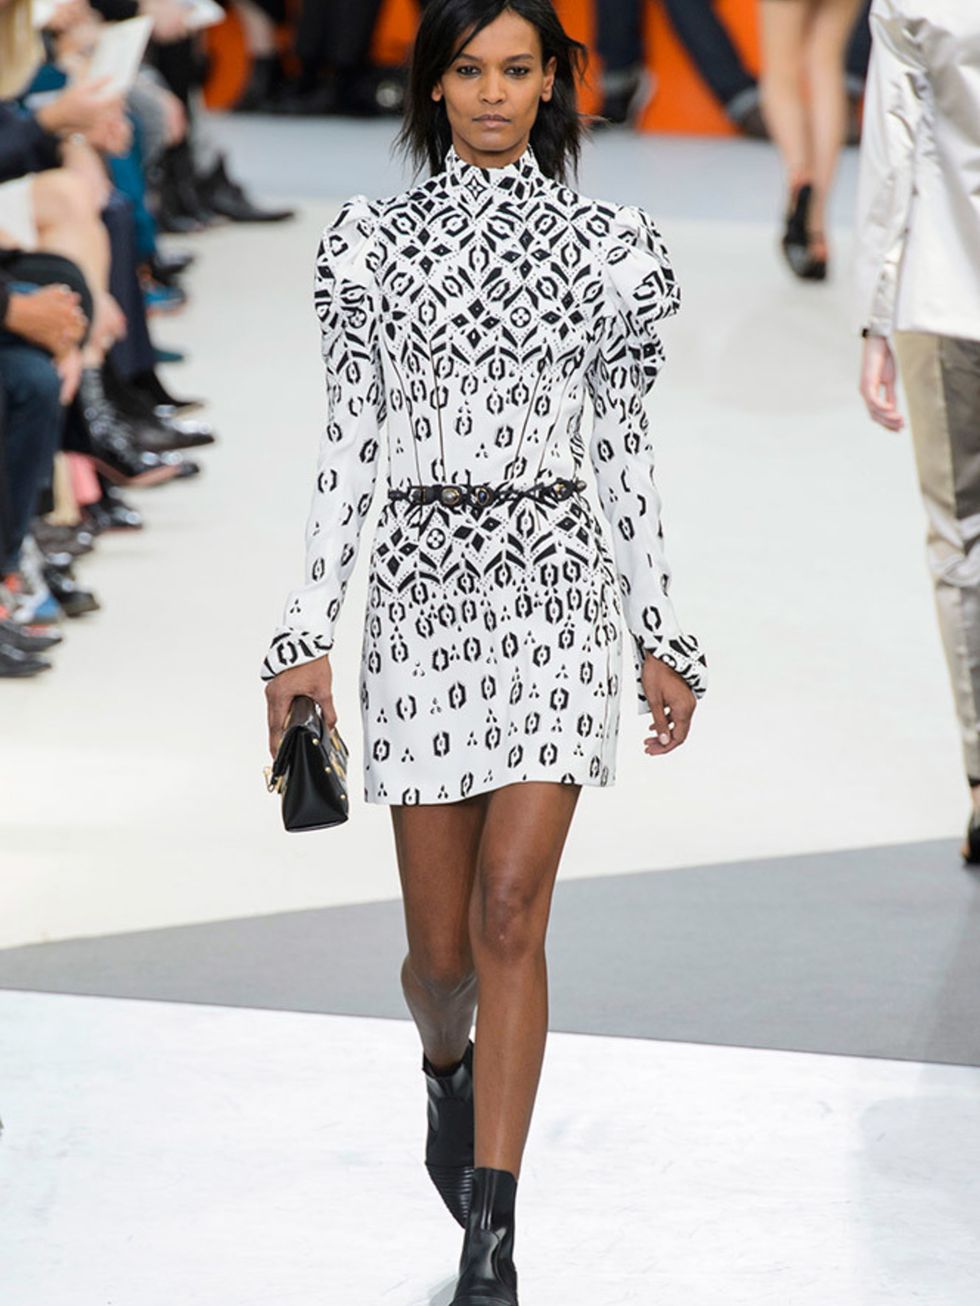 <p>LOUIS VUITTON</p>

<p>Everything about this look says Nicholas Ghesquières Louis Vuitton, and his obsession with retro-futurism. Take a 1890s sleeve, give it a 1980s dress shape, throw an abstract LV monogram print on it, wear it with a flat, black po